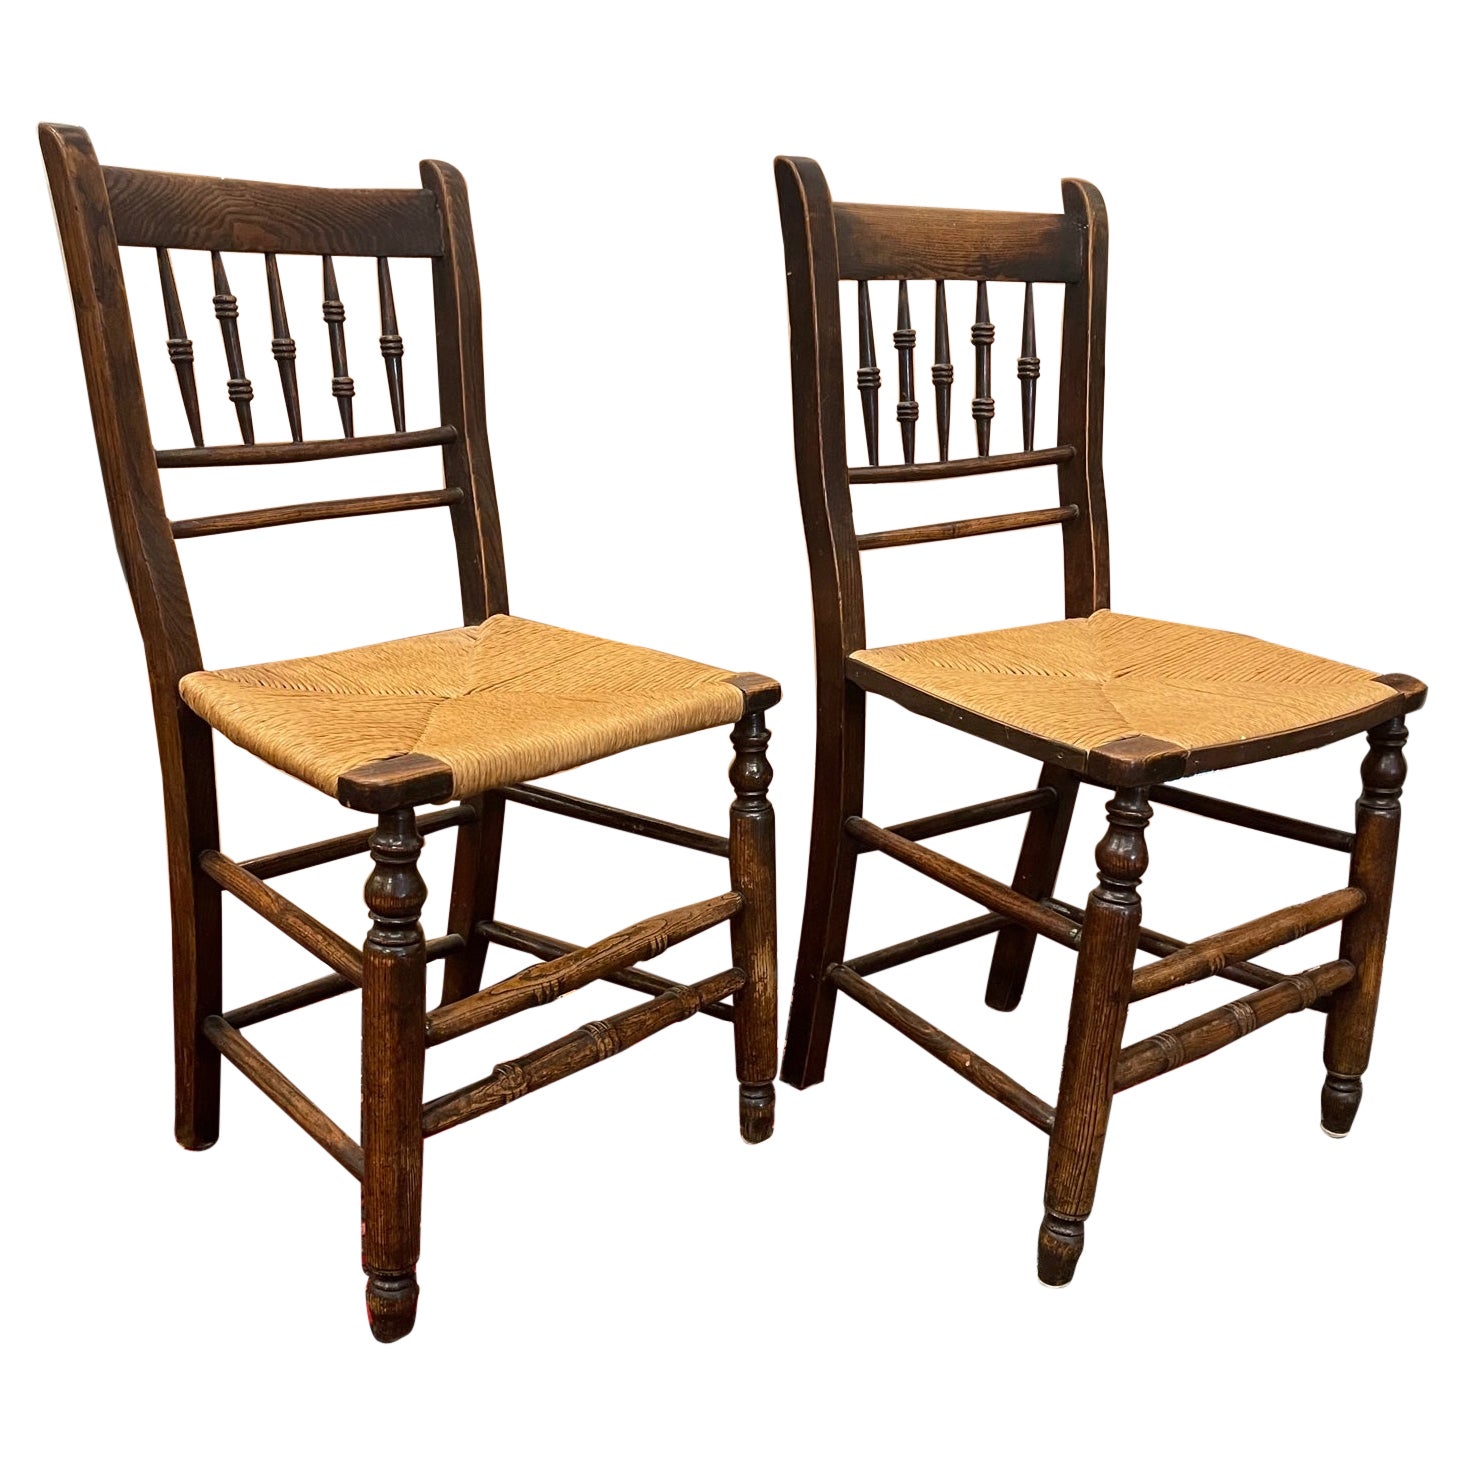 Pair of English Spindleback Side Chairs with Rush Seats, Early 19th Century For Sale